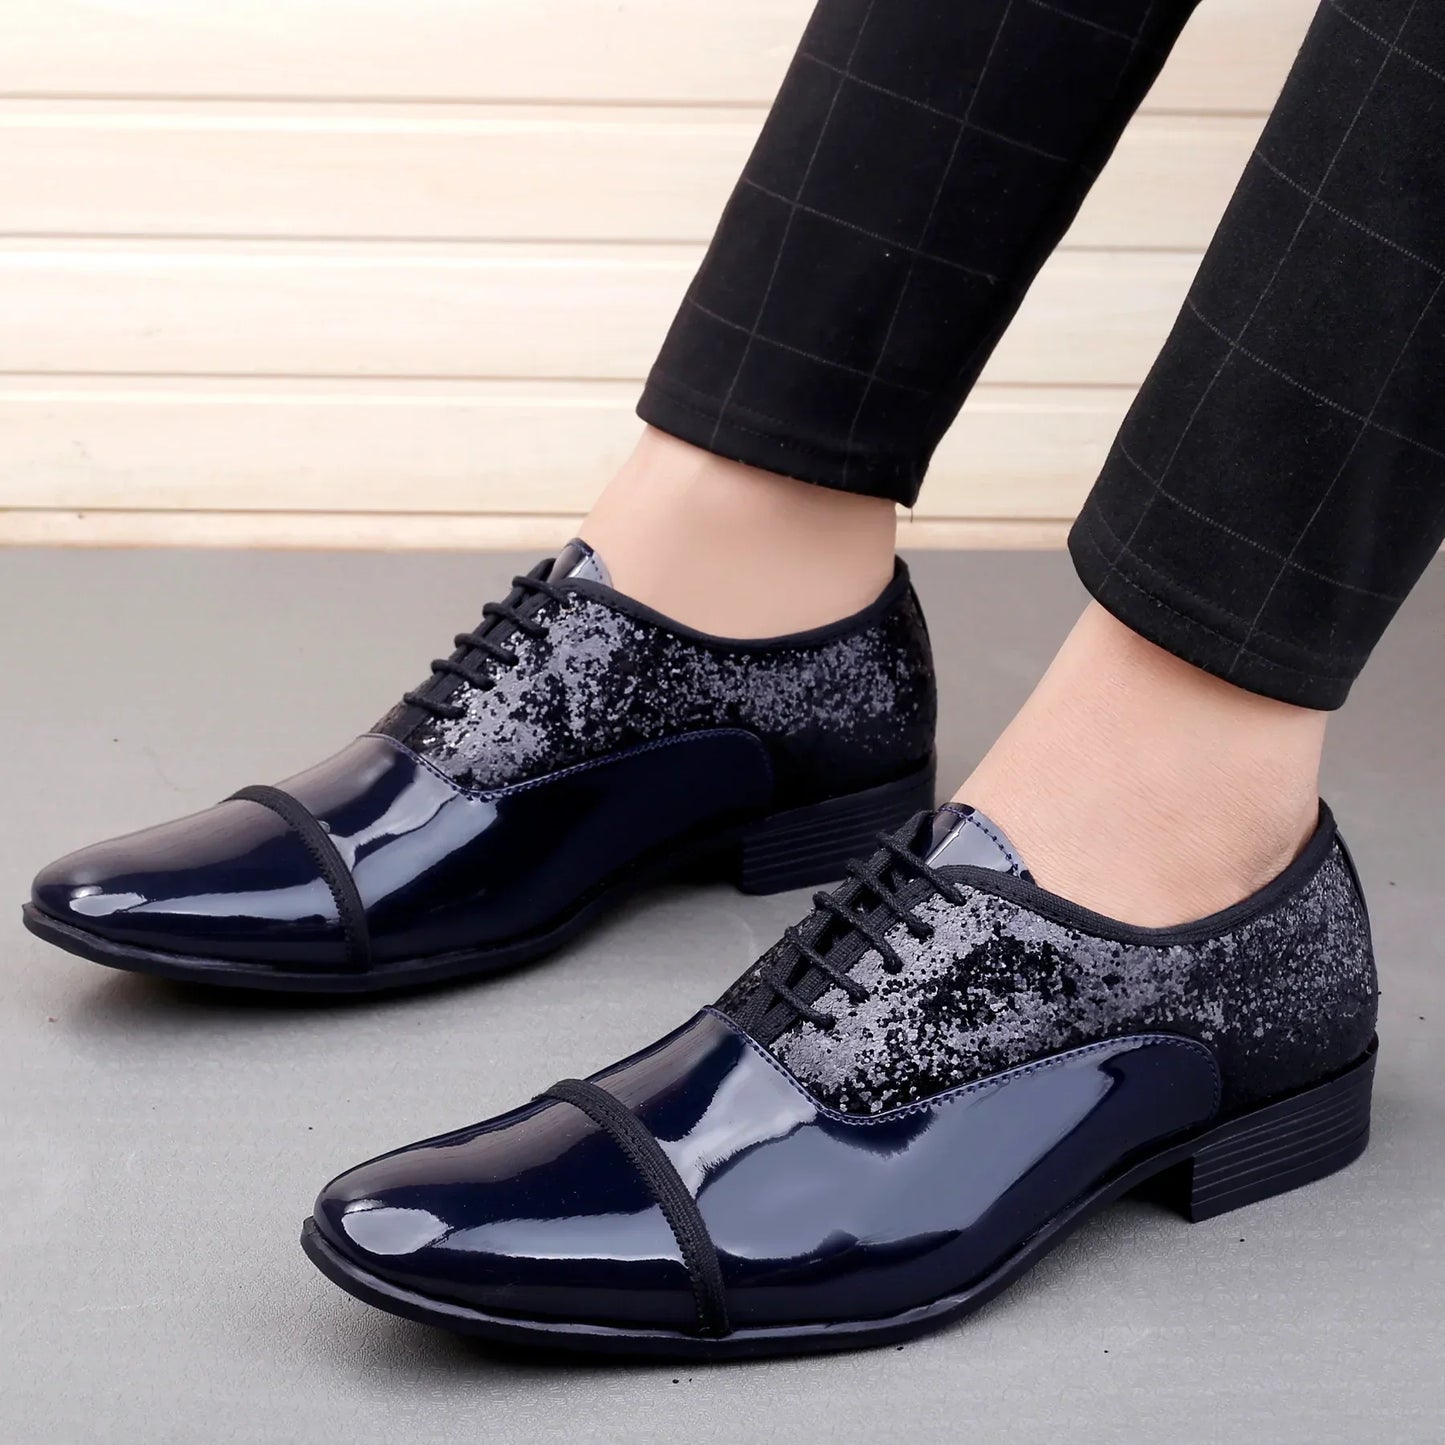 Italian Cut Patent Leather Formal Shoes